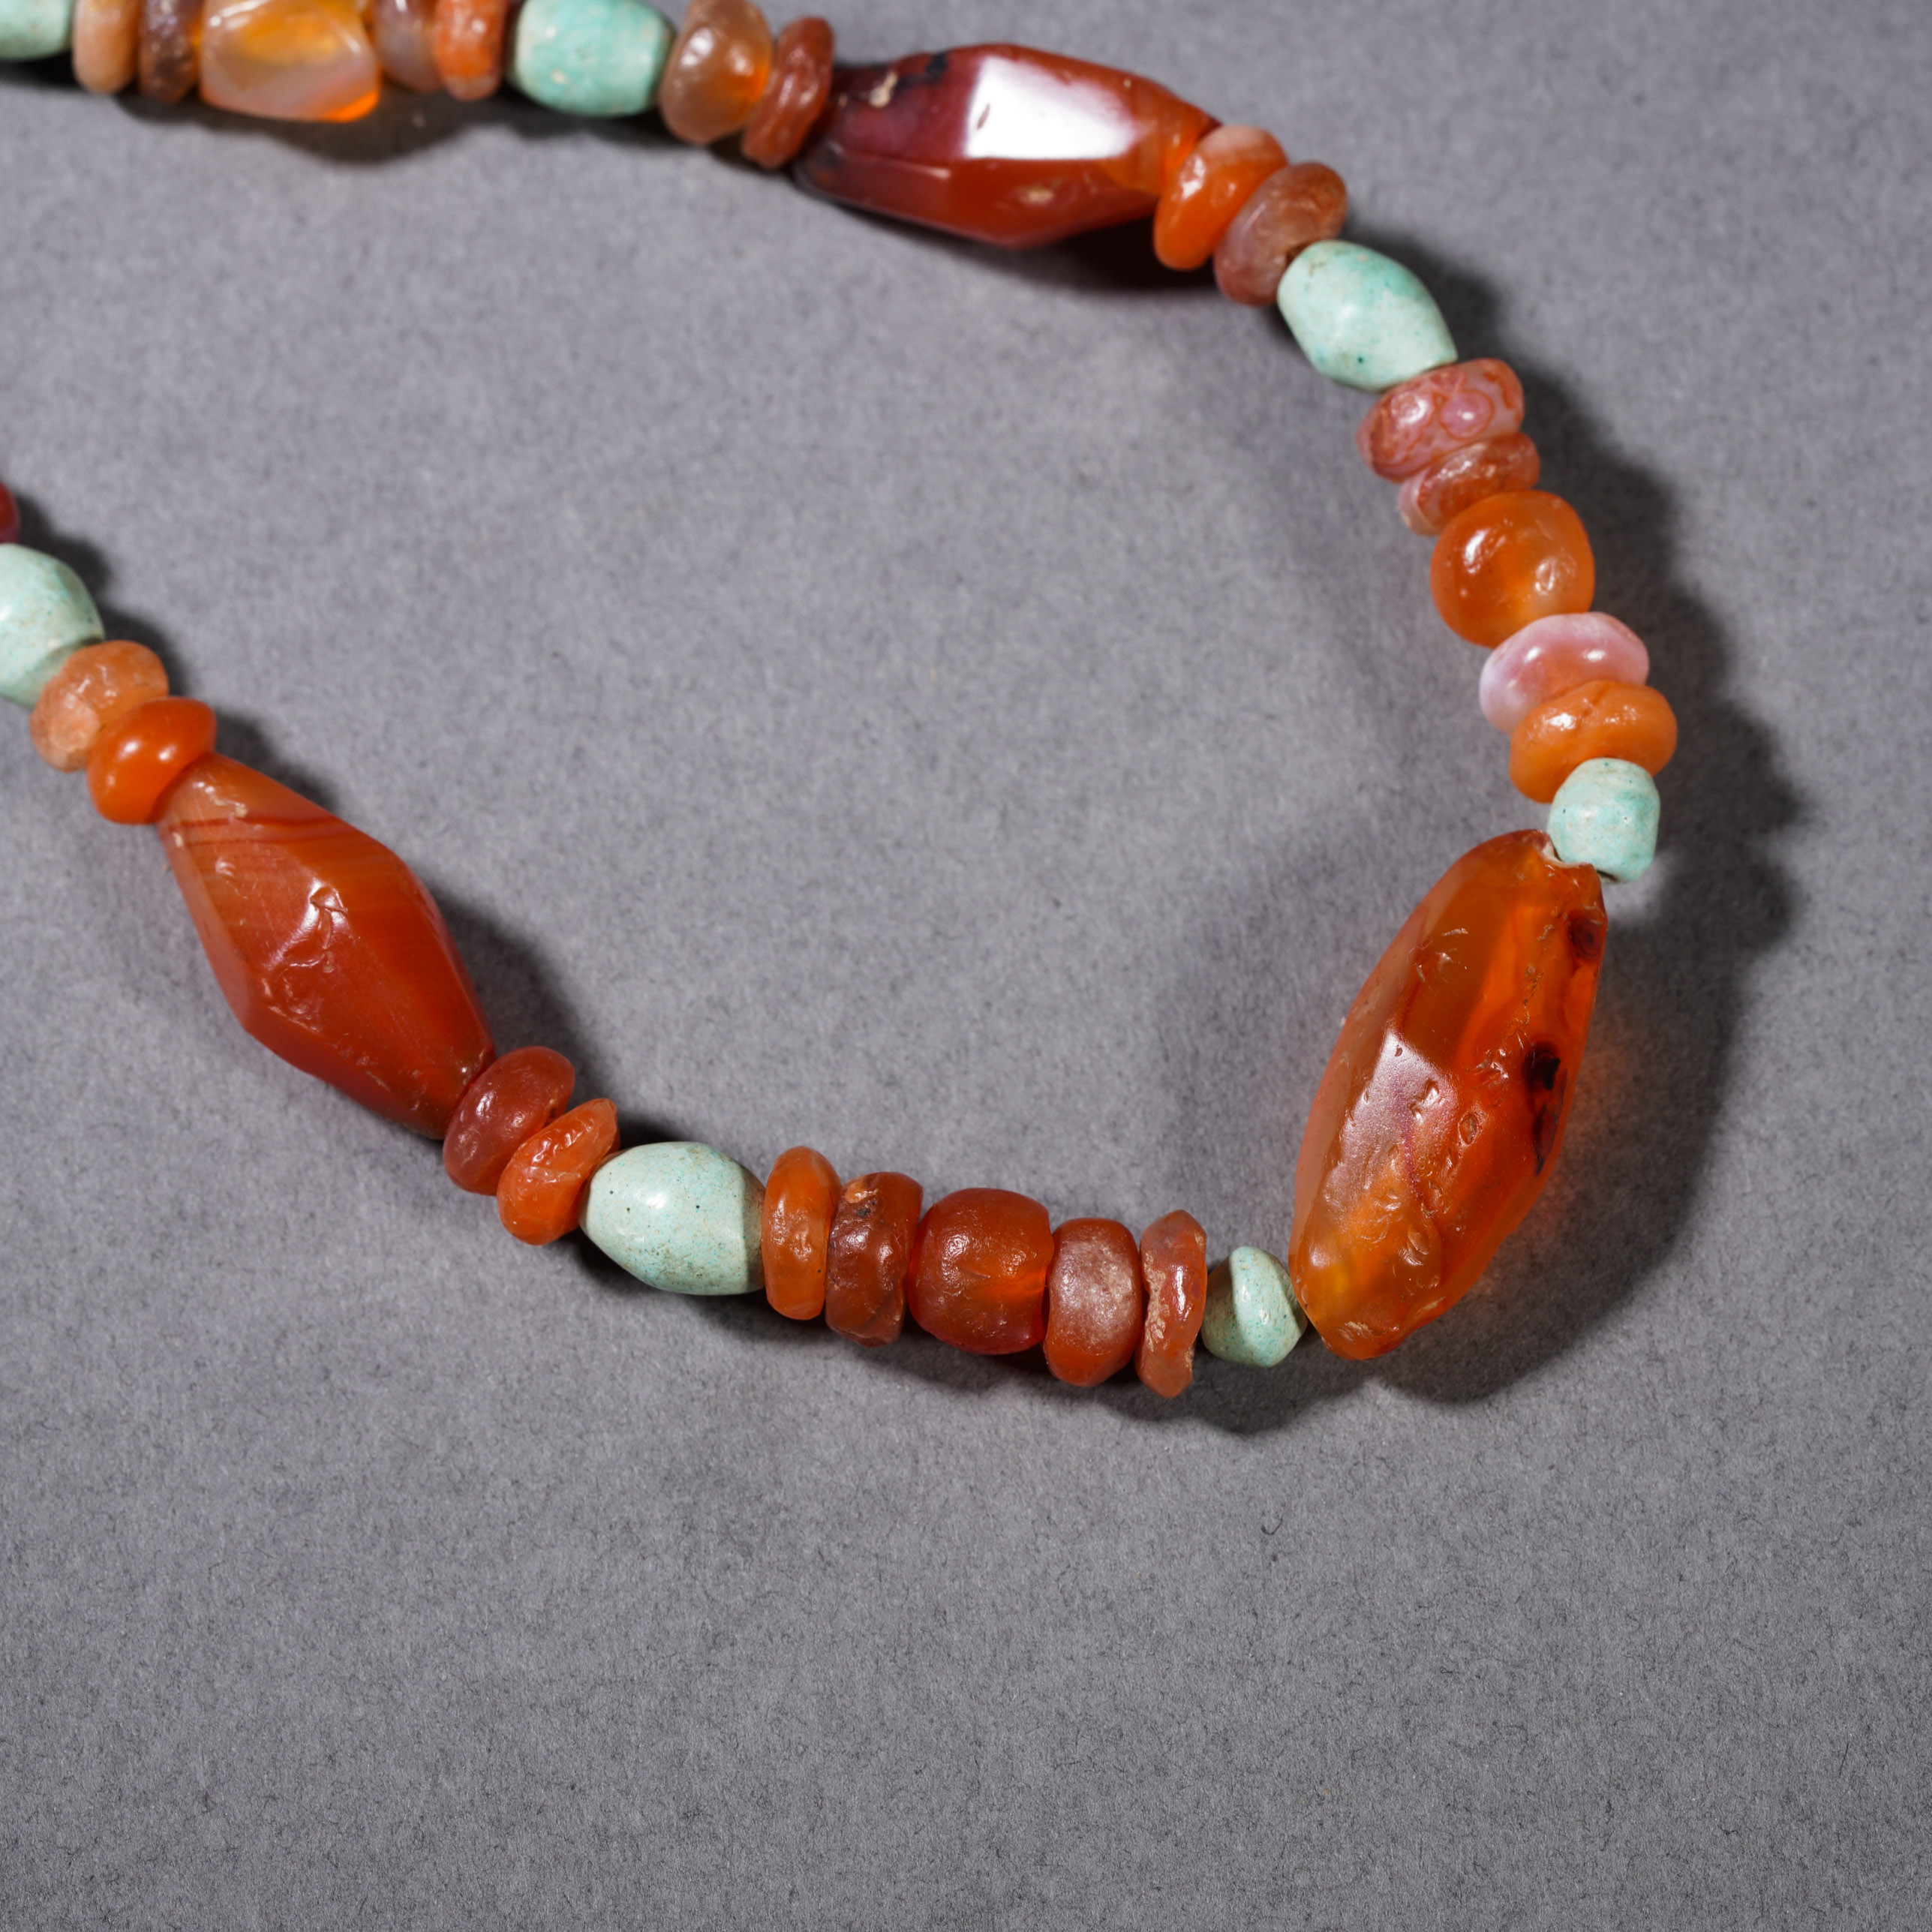 A Chinese Multi-Gems Beads Necklace - Image 2 of 6